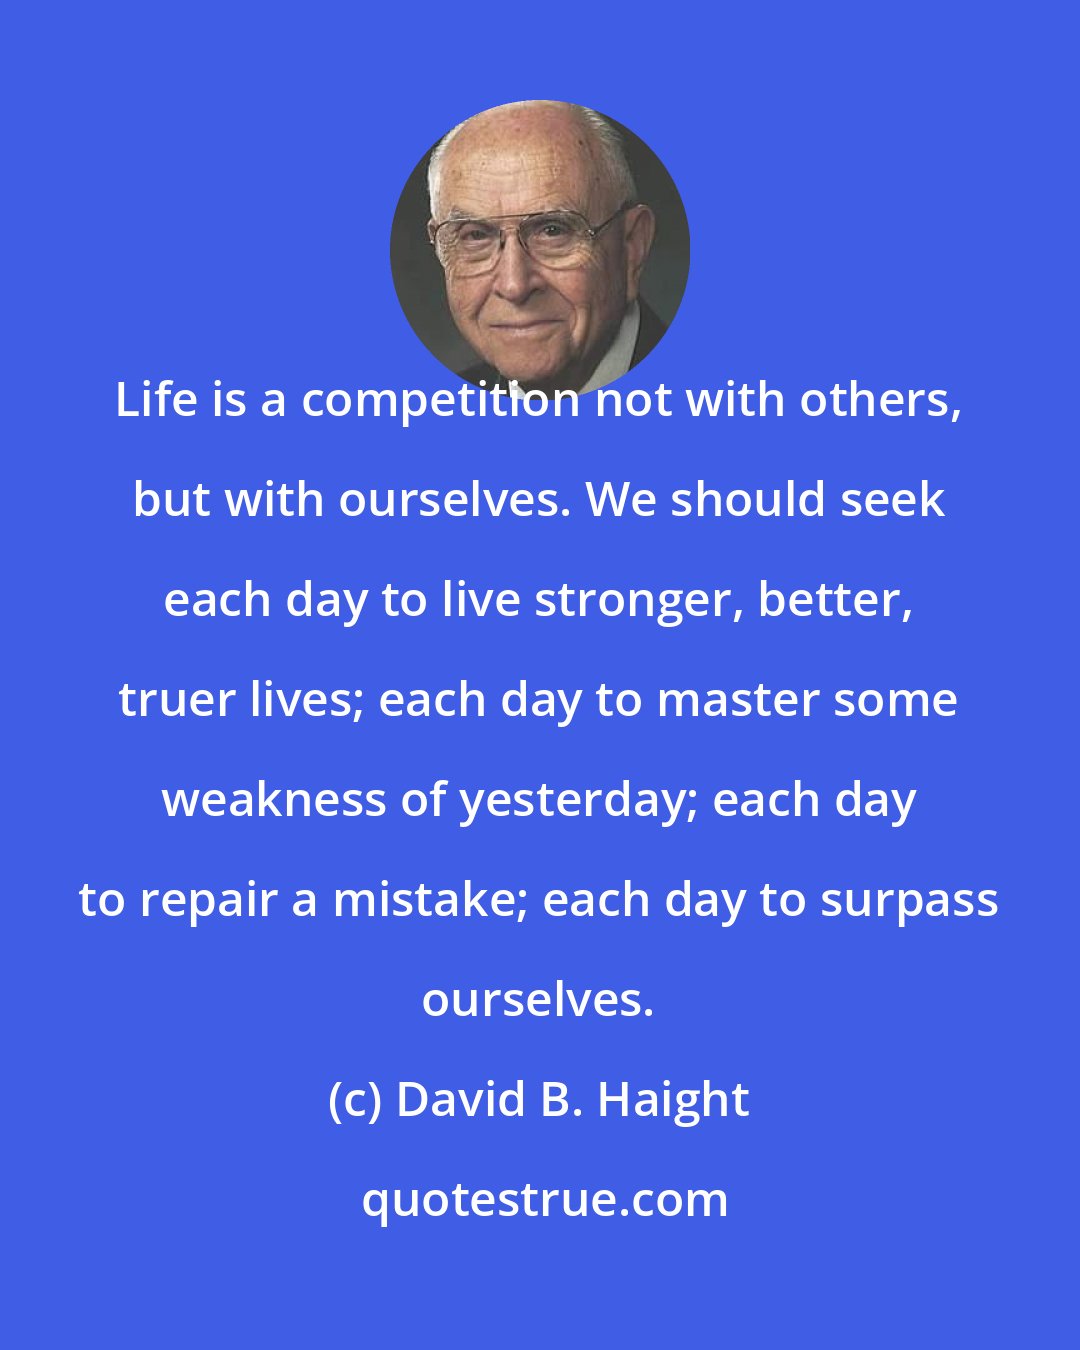 David B. Haight: Life is a competition not with others, but with ourselves. We should seek each day to live stronger, better, truer lives; each day to master some weakness of yesterday; each day to repair a mistake; each day to surpass ourselves.